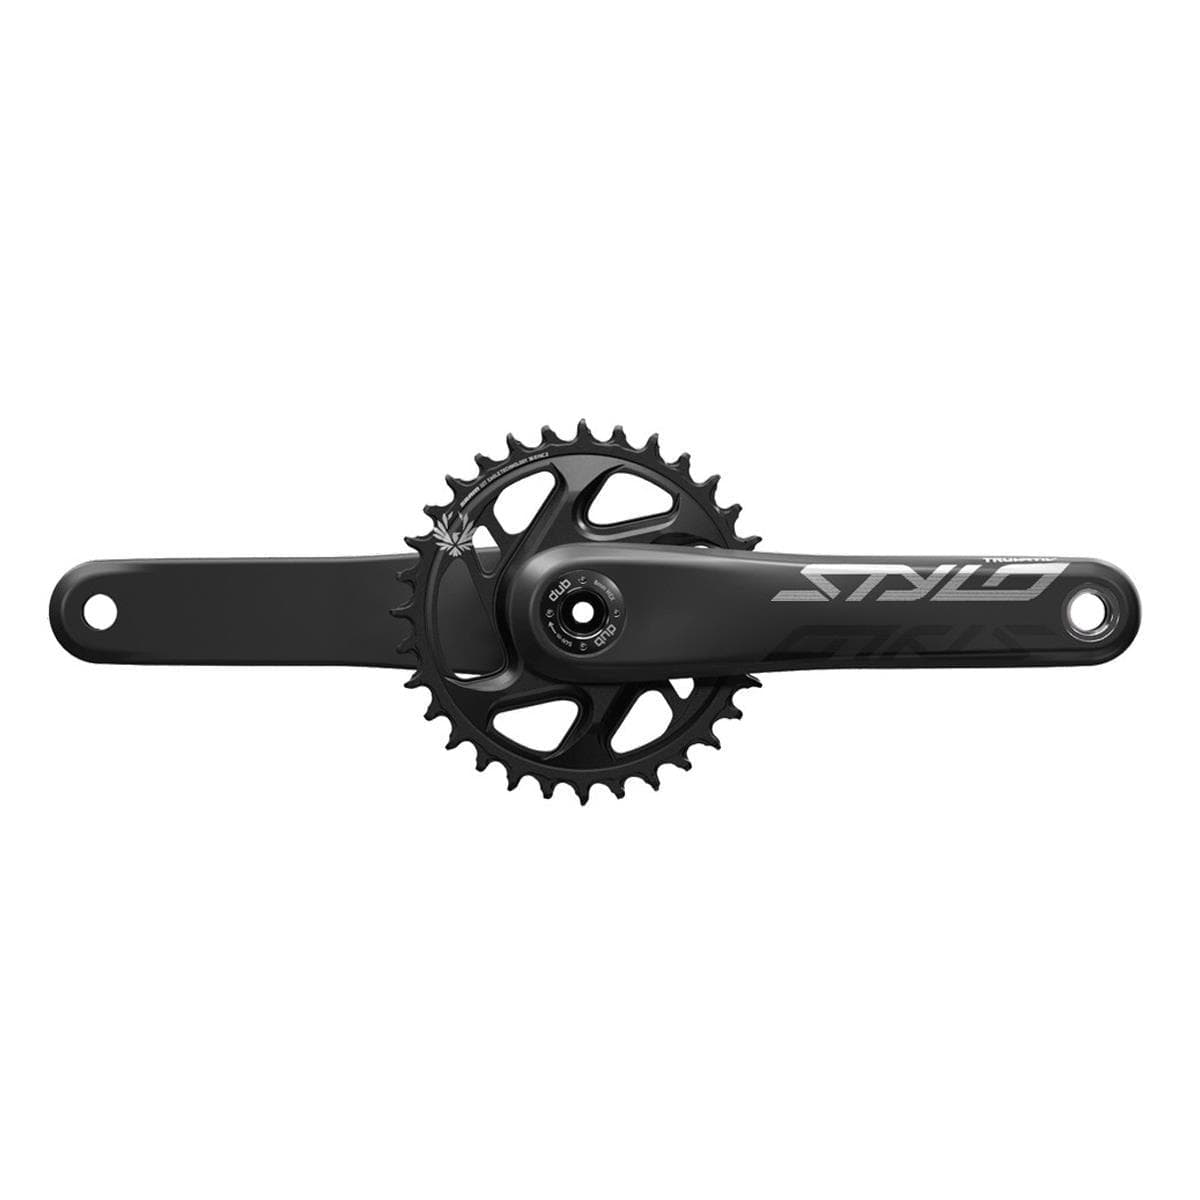 Truvativ Crank Stylo Carbon Eagle Fat Bike 5" Dub 12S 170 Wdirect Mount 30T X-Sync 2 Chainring Black (Dub Cups/Bearingsnot Included): Black 170Mm